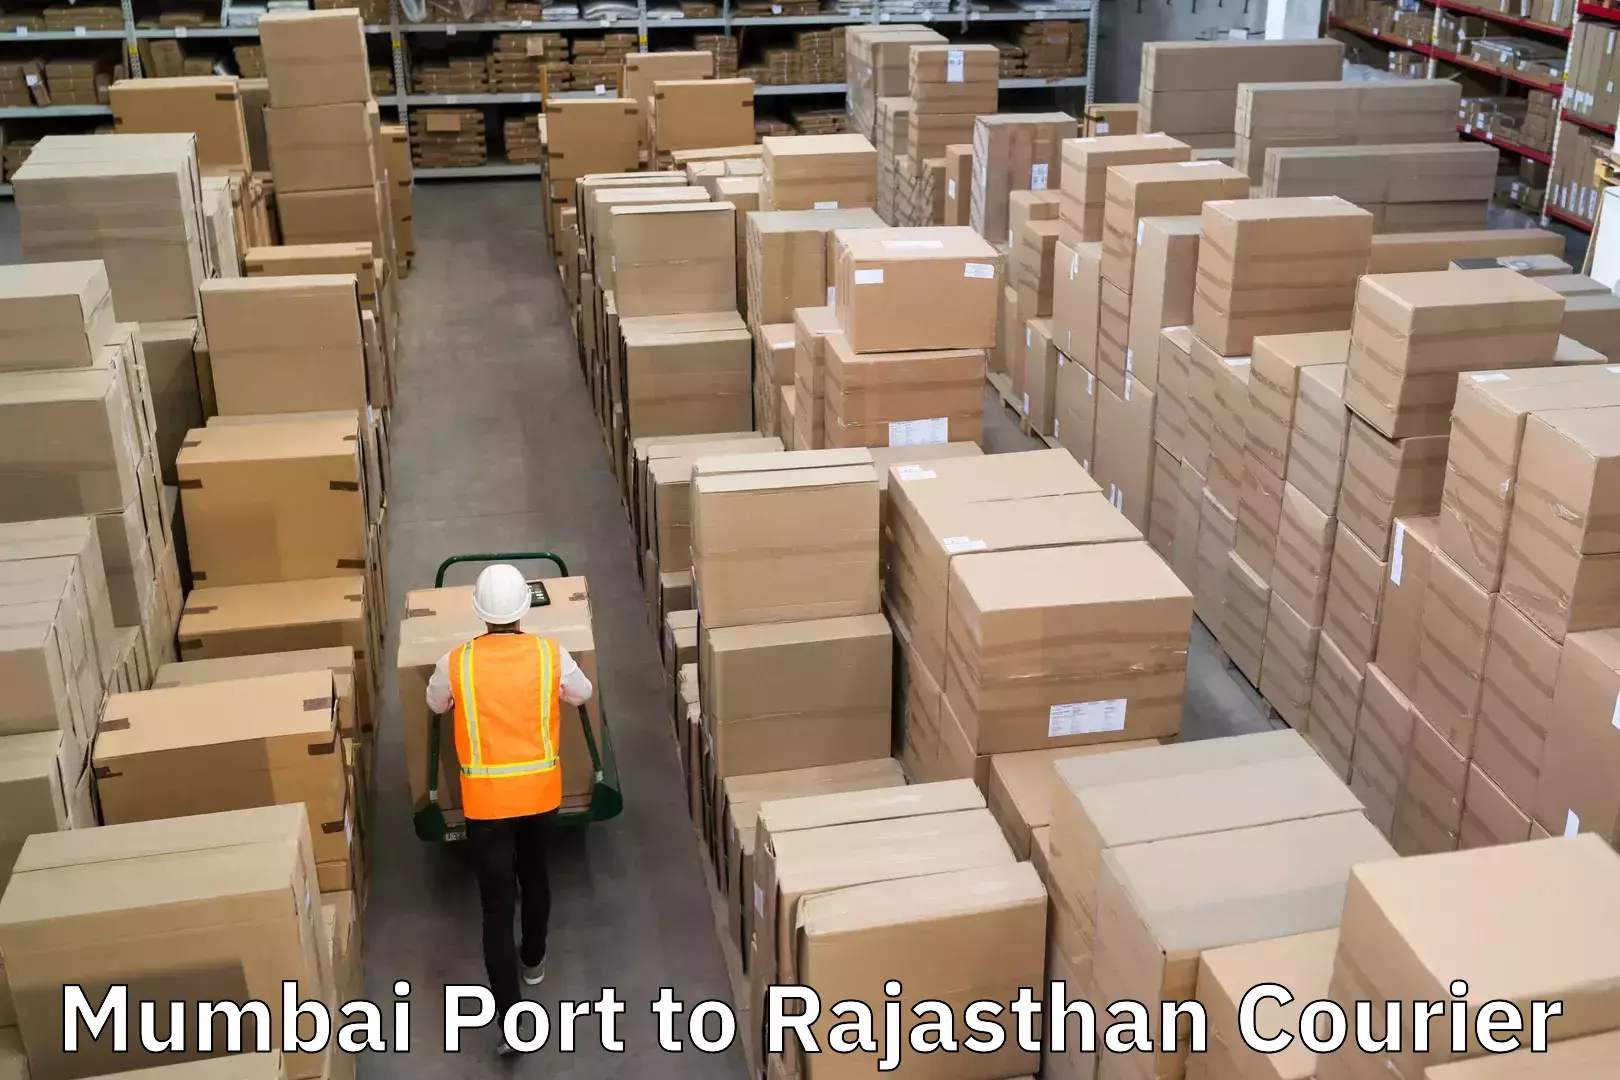 Residential courier service Mumbai Port to Rajasthan